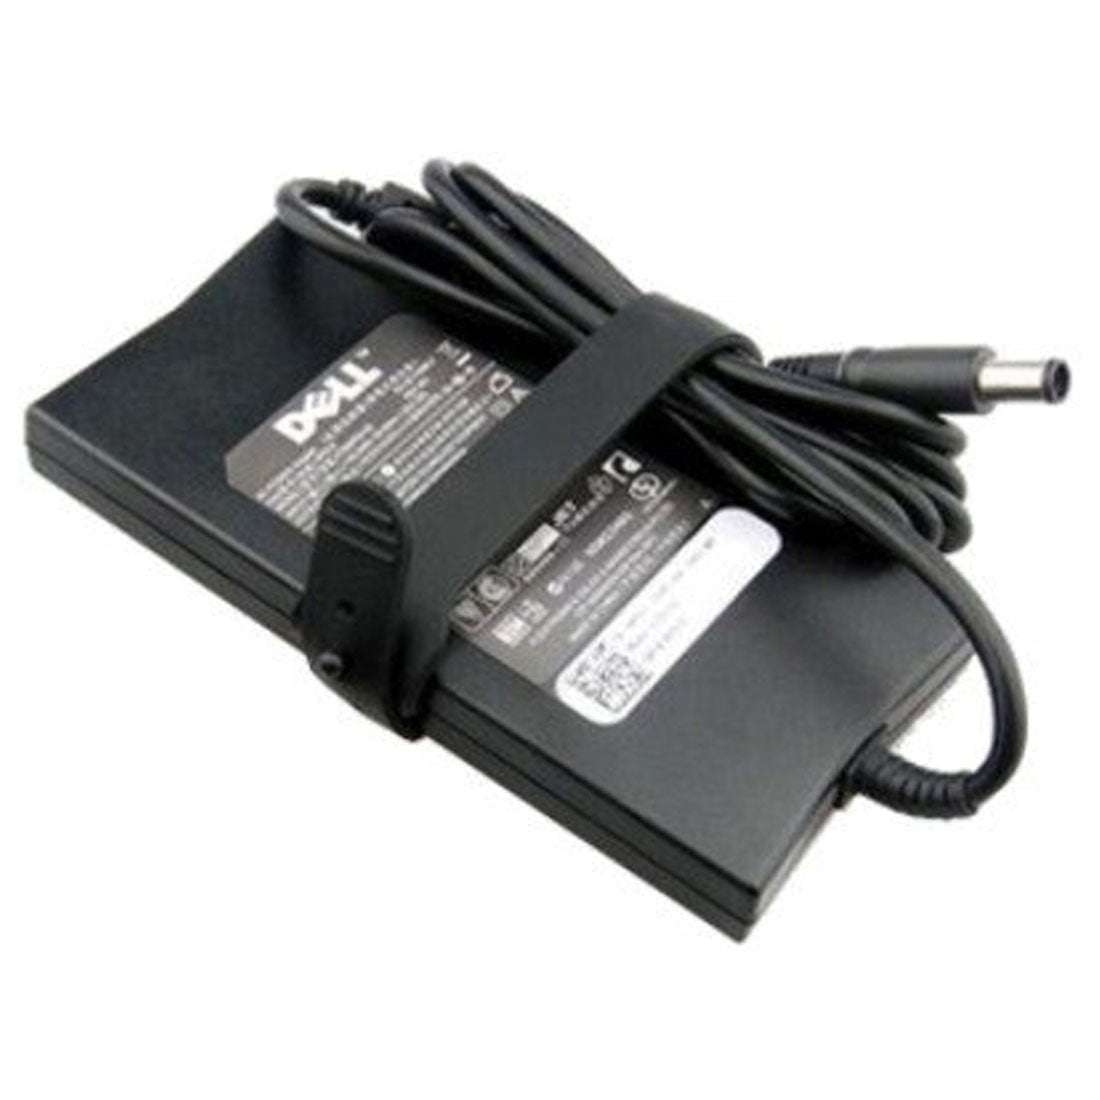 Dell Original 130W 19.5V 7.4mm Pin Laptop Charger Adapter for Inspiron 640m With Power Cord